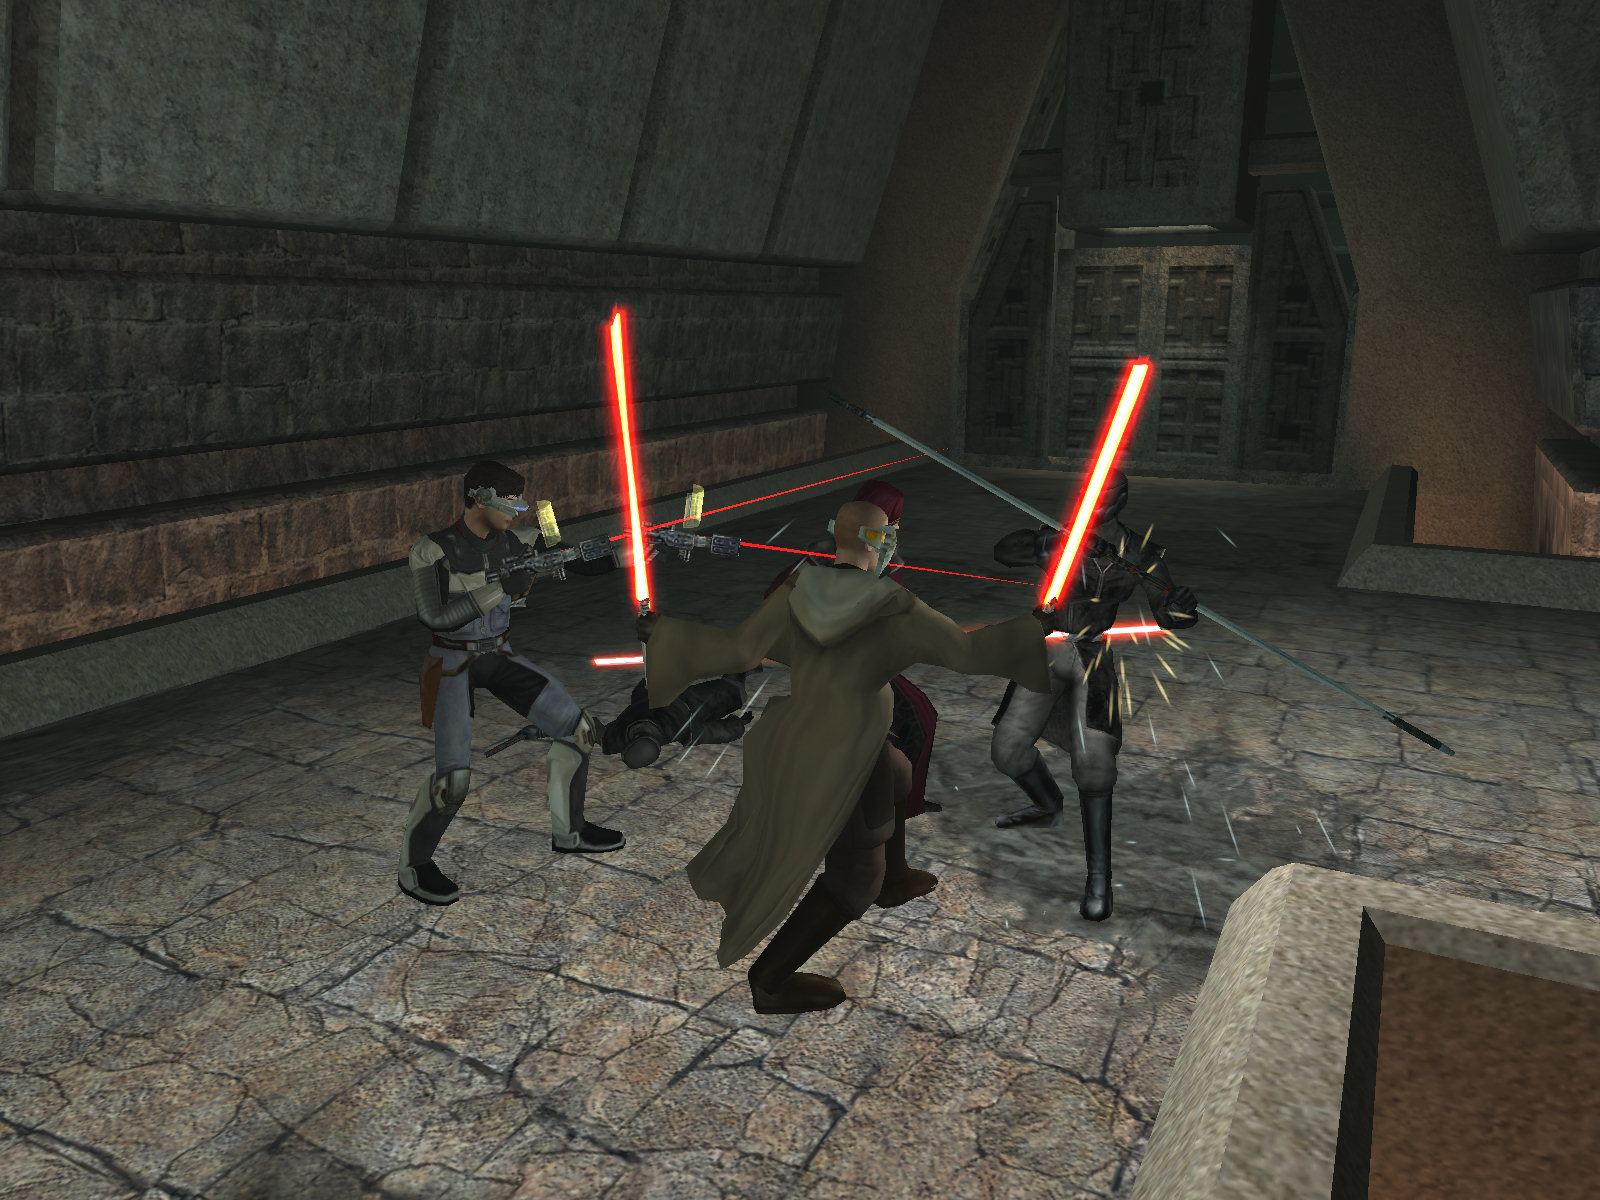 Star Wars: Knights of the Old Republic II - The Sith Lords Image Gallery.